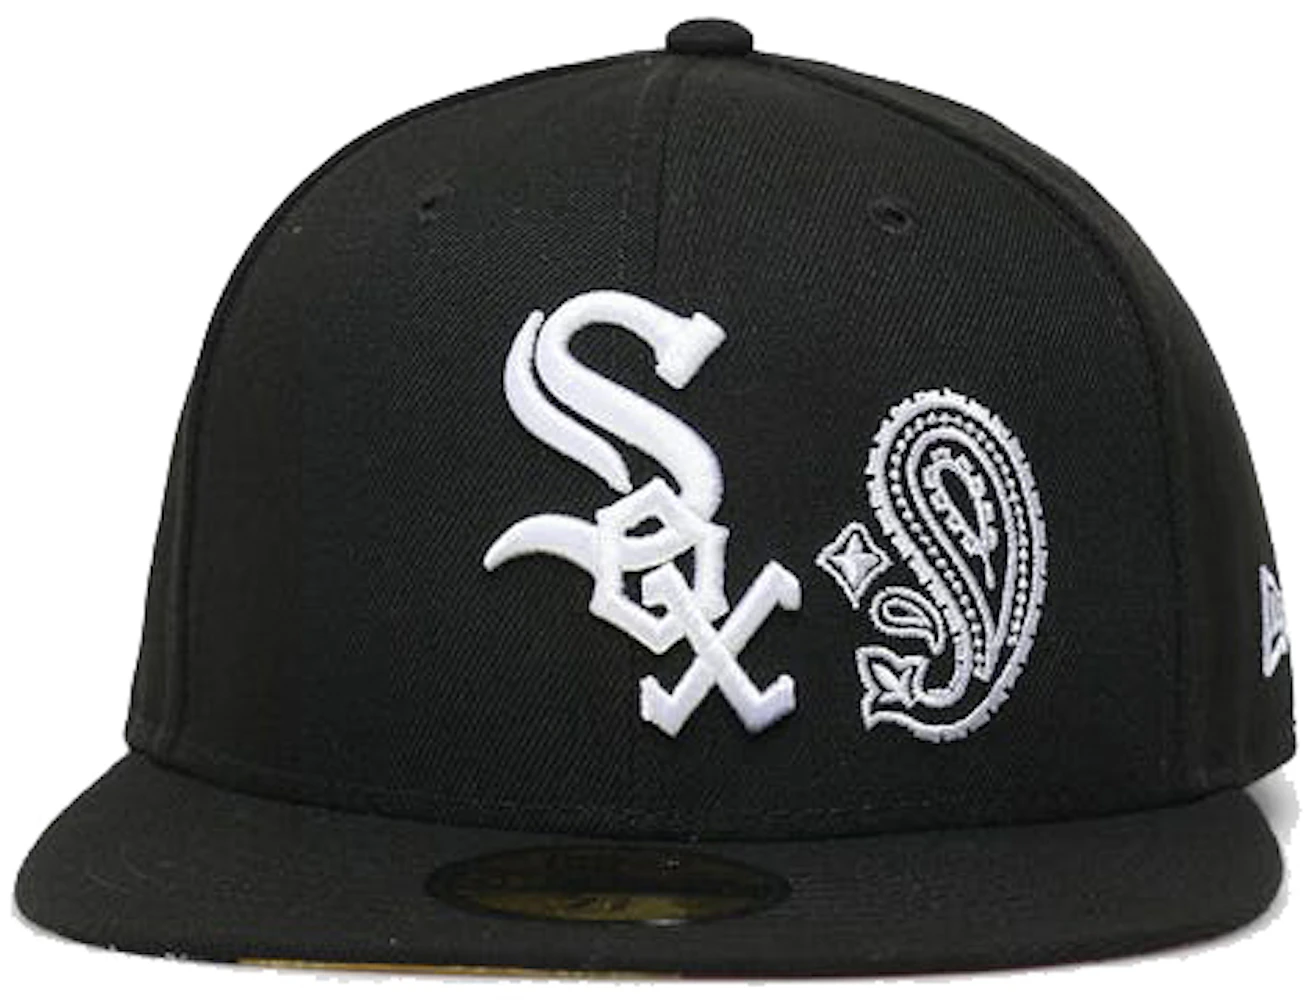 New Era Men's Black Chicago White Sox 9/11 Memorial Side Patch 59FIFTY Fitted Hat